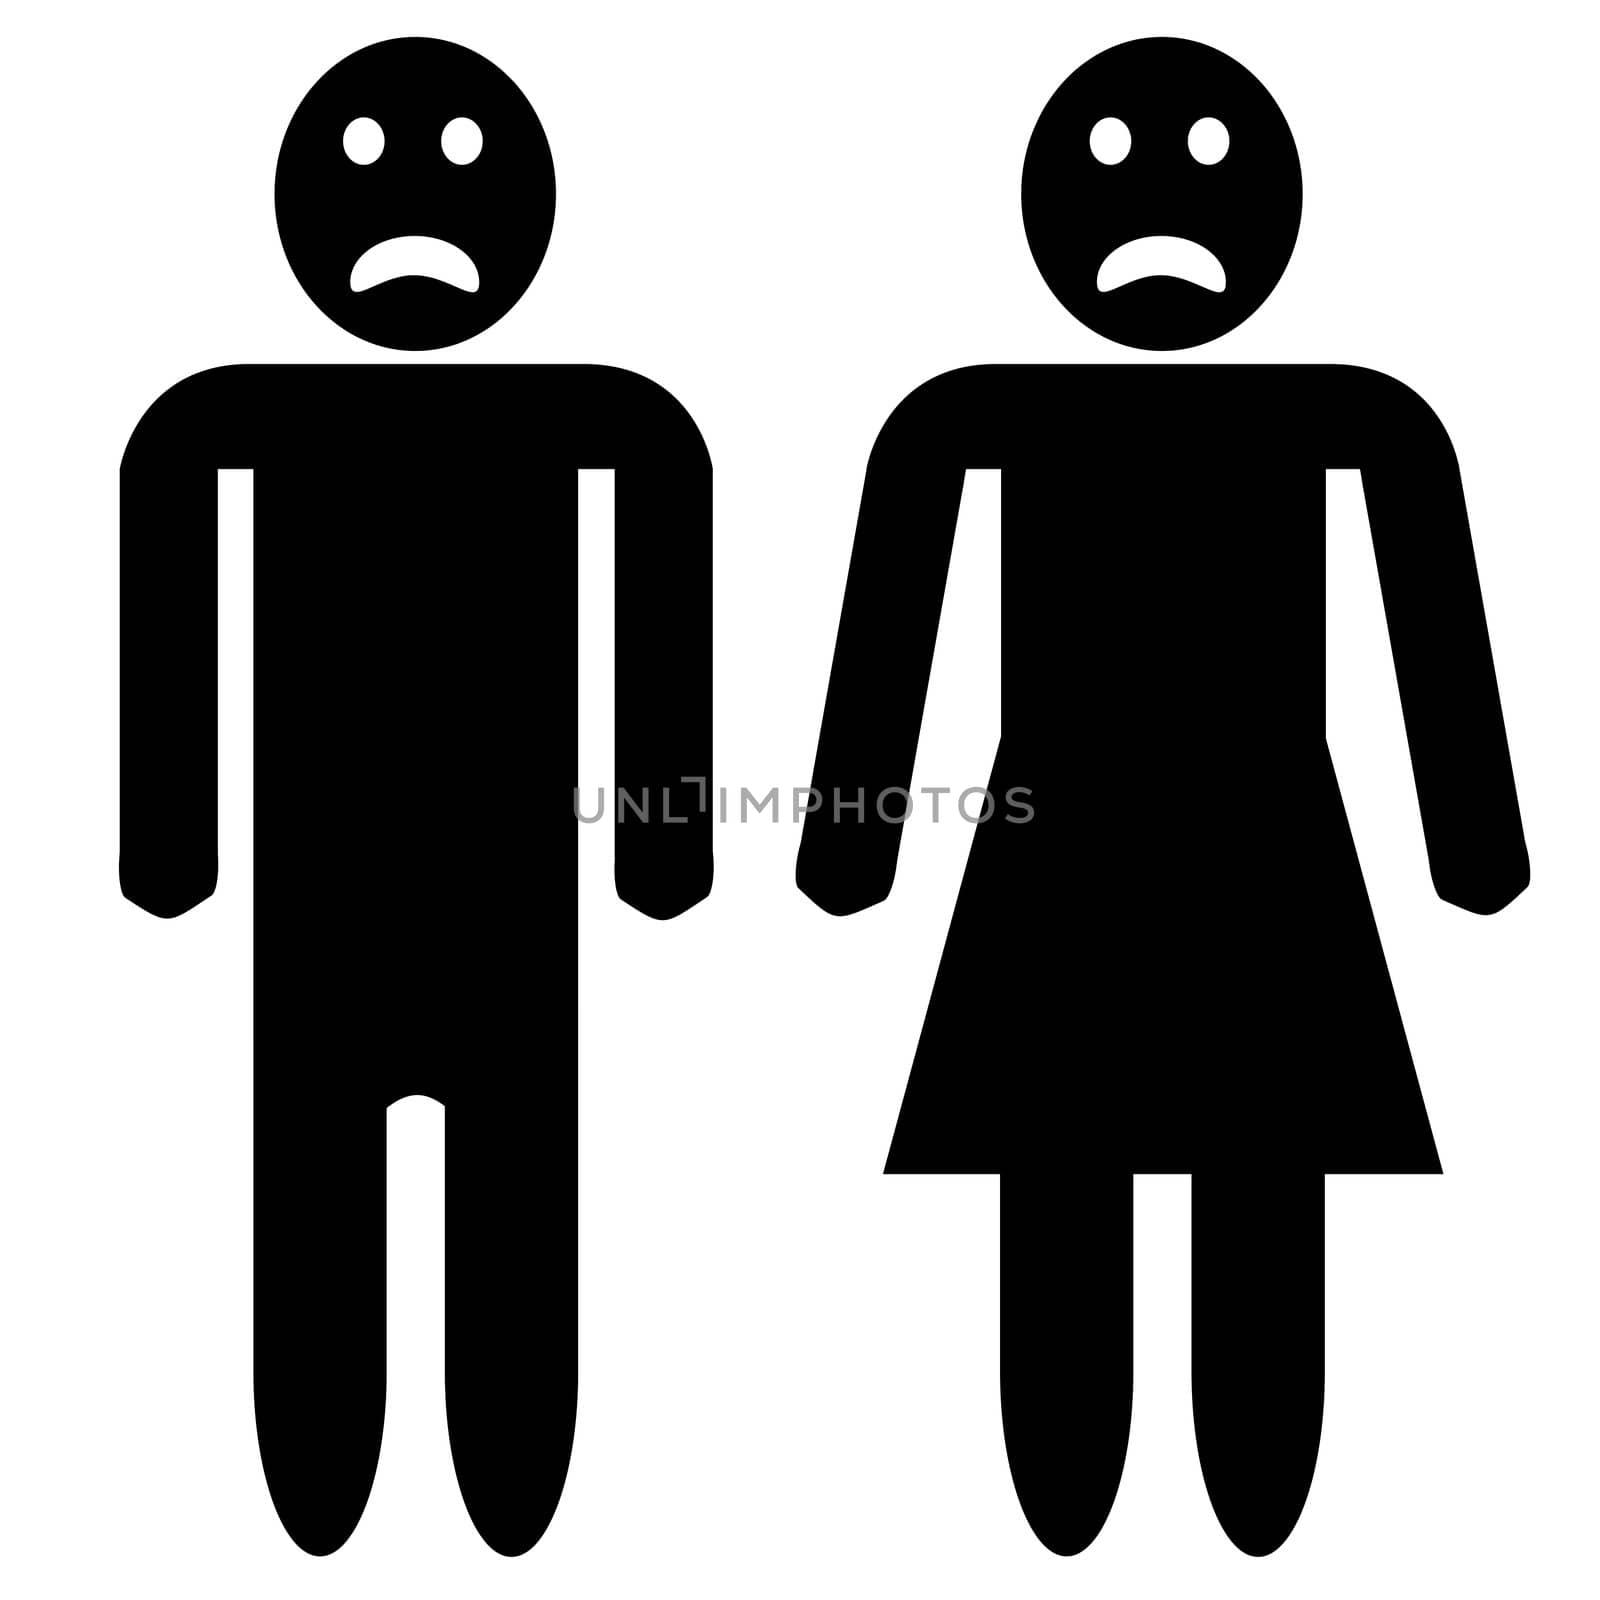 A illustration of a man and woman silhouette, both with sad faces